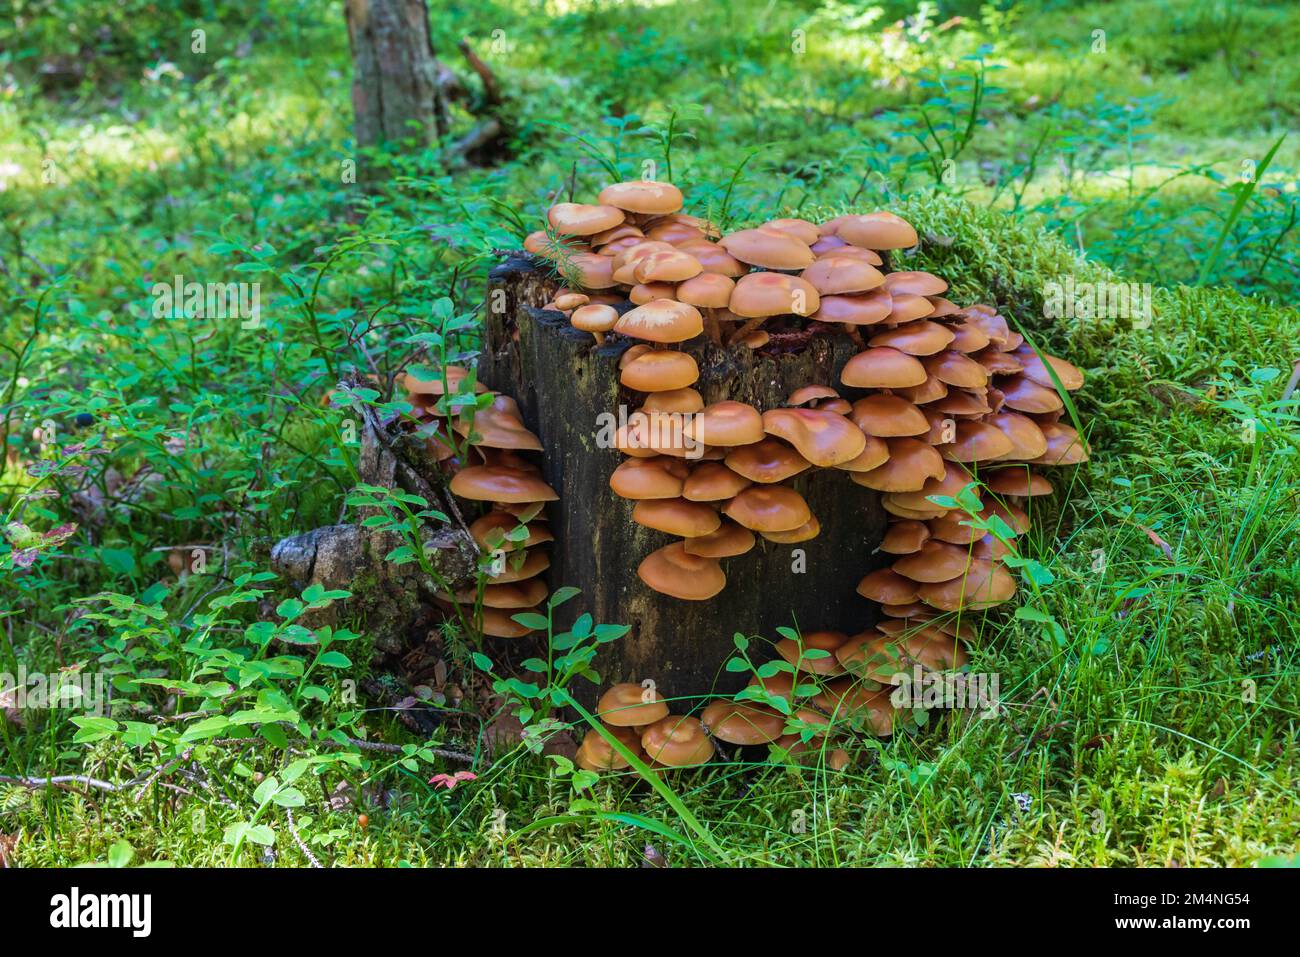 Collection of mushrooms on a stump in a forest with lots of ground vegetation, picture from Mellansel, Vasternorrland Sweden. Stock Photo